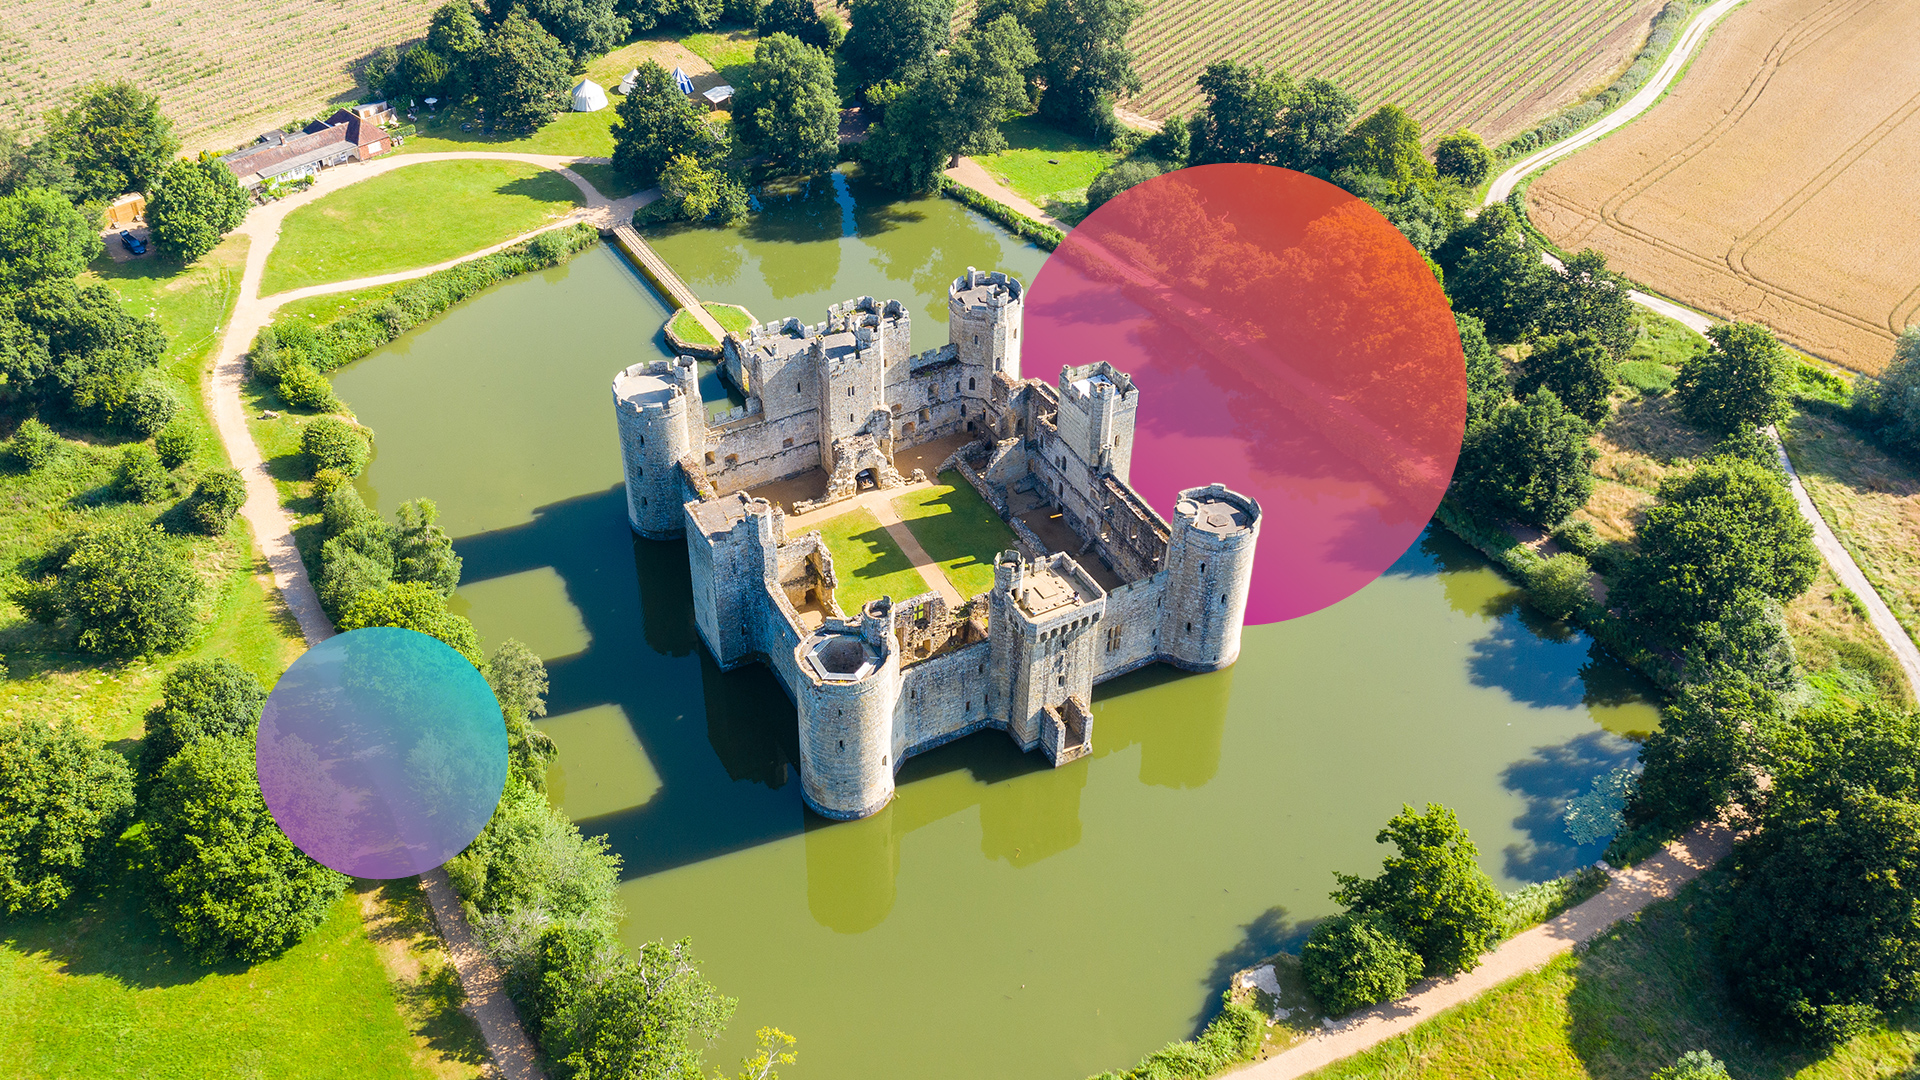 The ‘Economic Moat’: What It Is and How to Build It